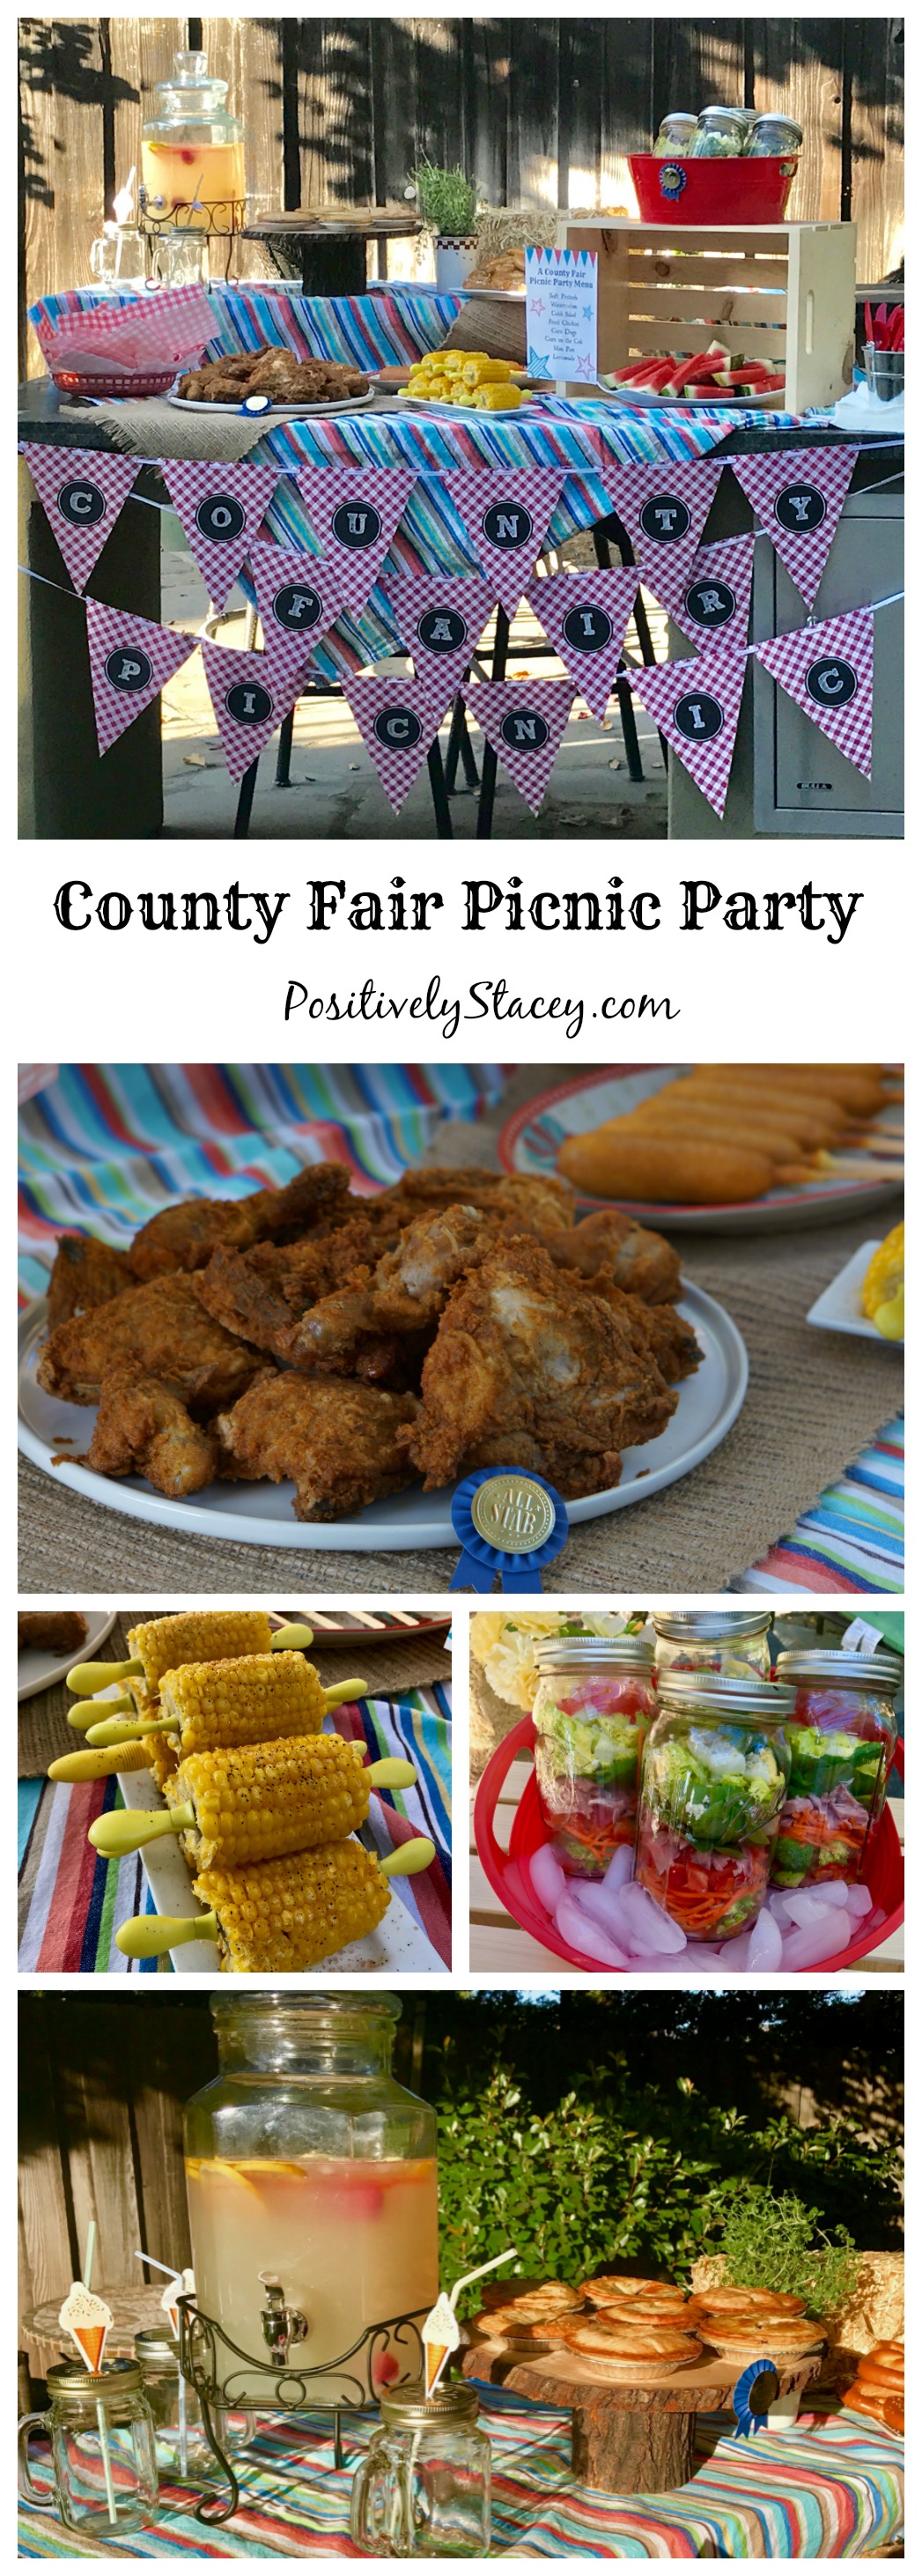 A County Fair Picnic Party that includes a yummy make-ahead menu of favorite fair foods and carnival games for everyone to play.